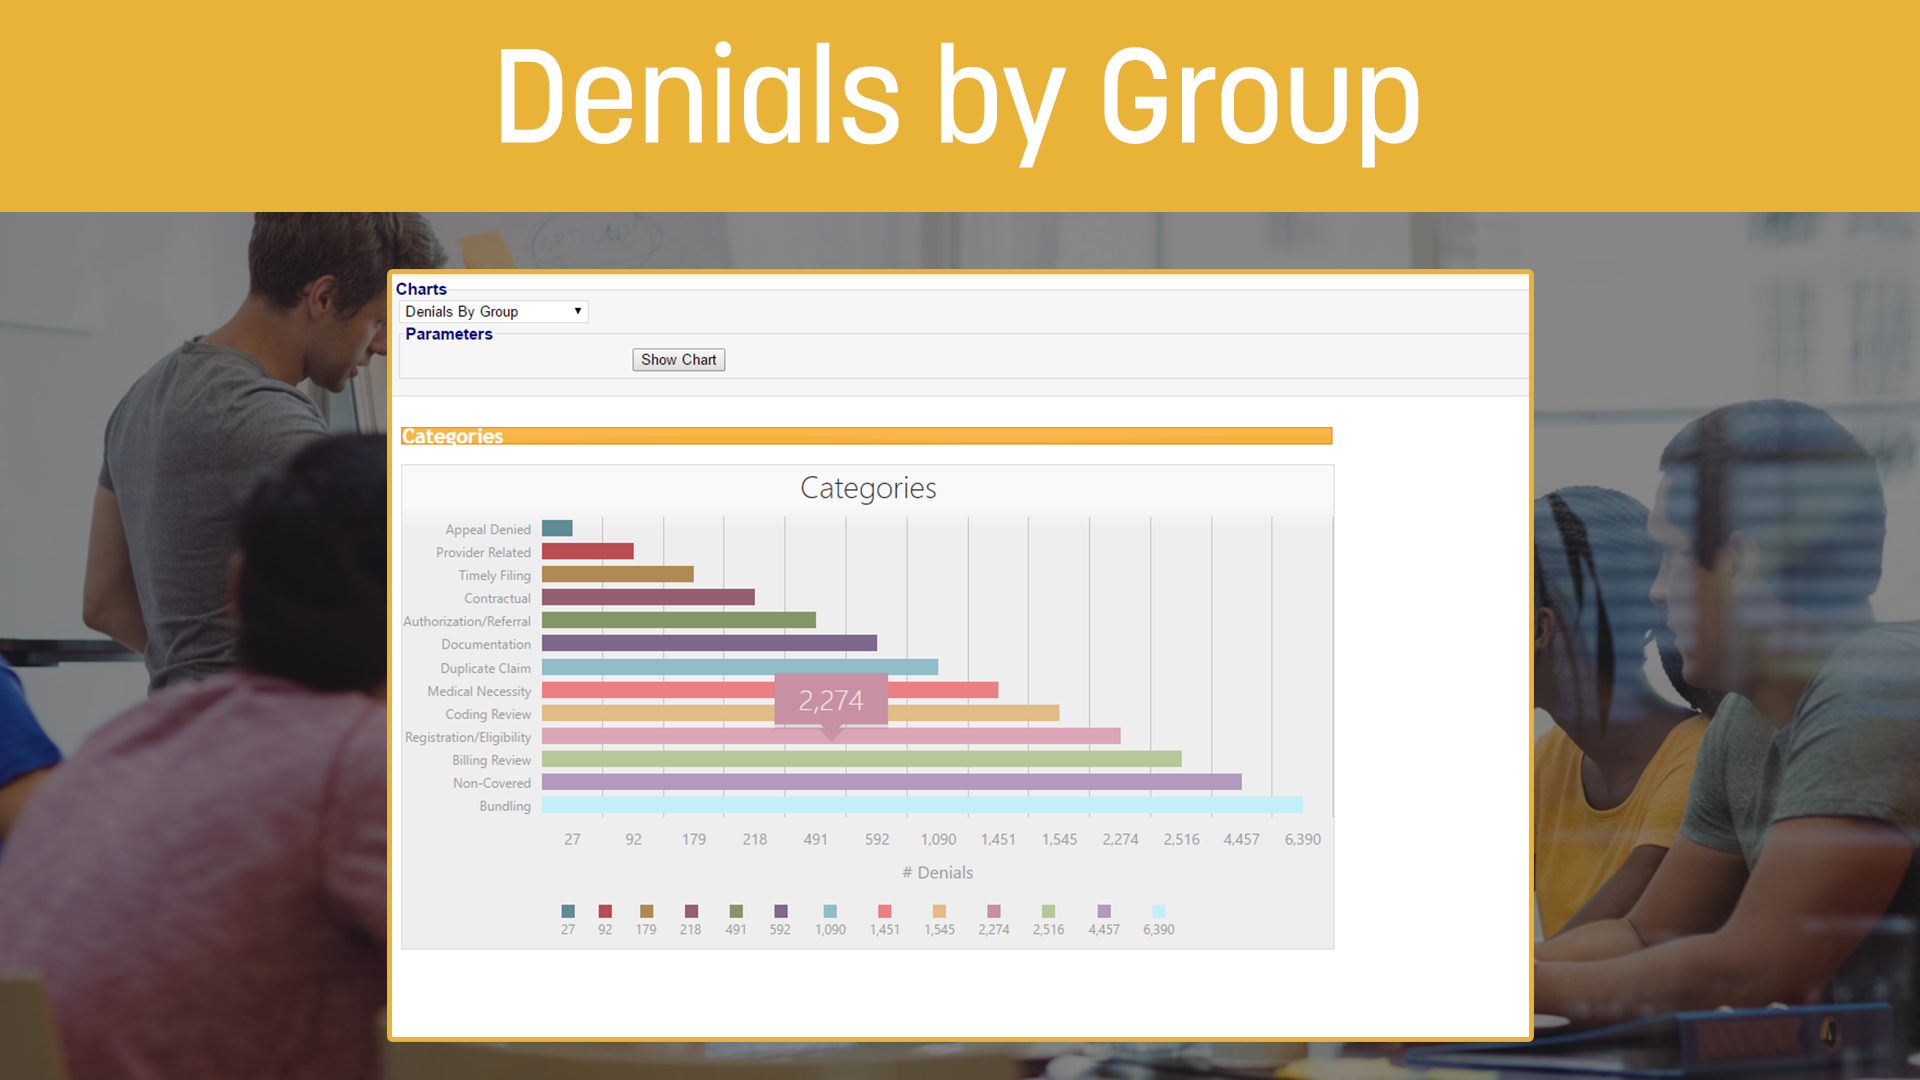 Denials by Group